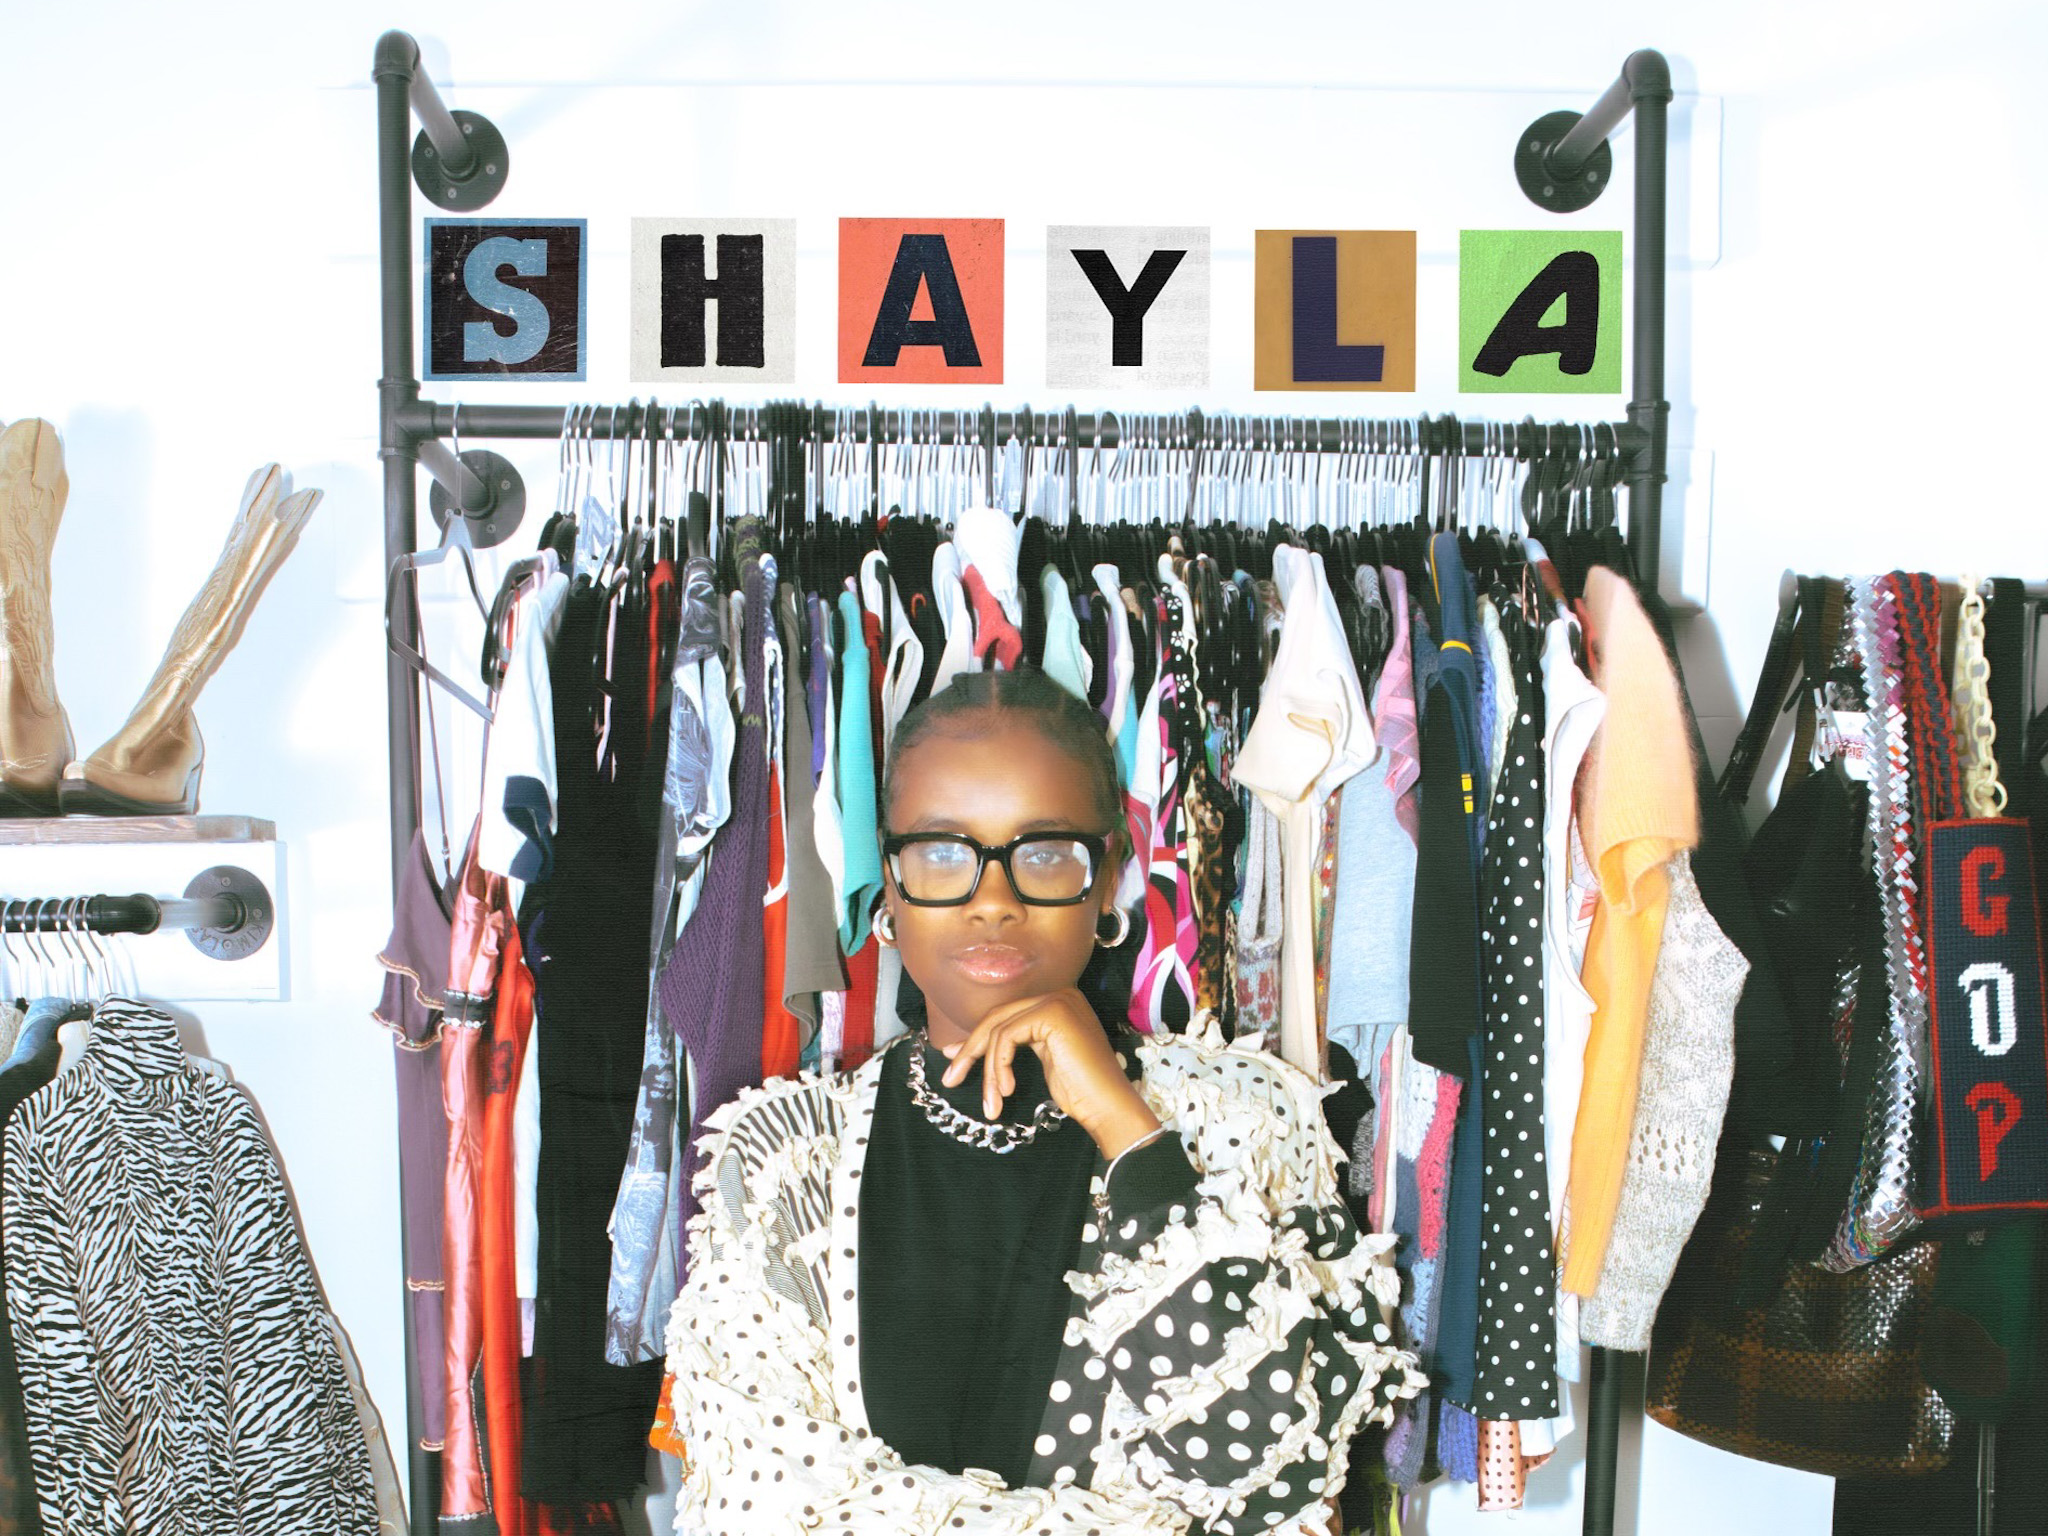 Shayla Boyd owns Street2Vintage, a secondhand clothing store located at 796 Parsons Ave. Credit: Courtesy of Shayla Boyd